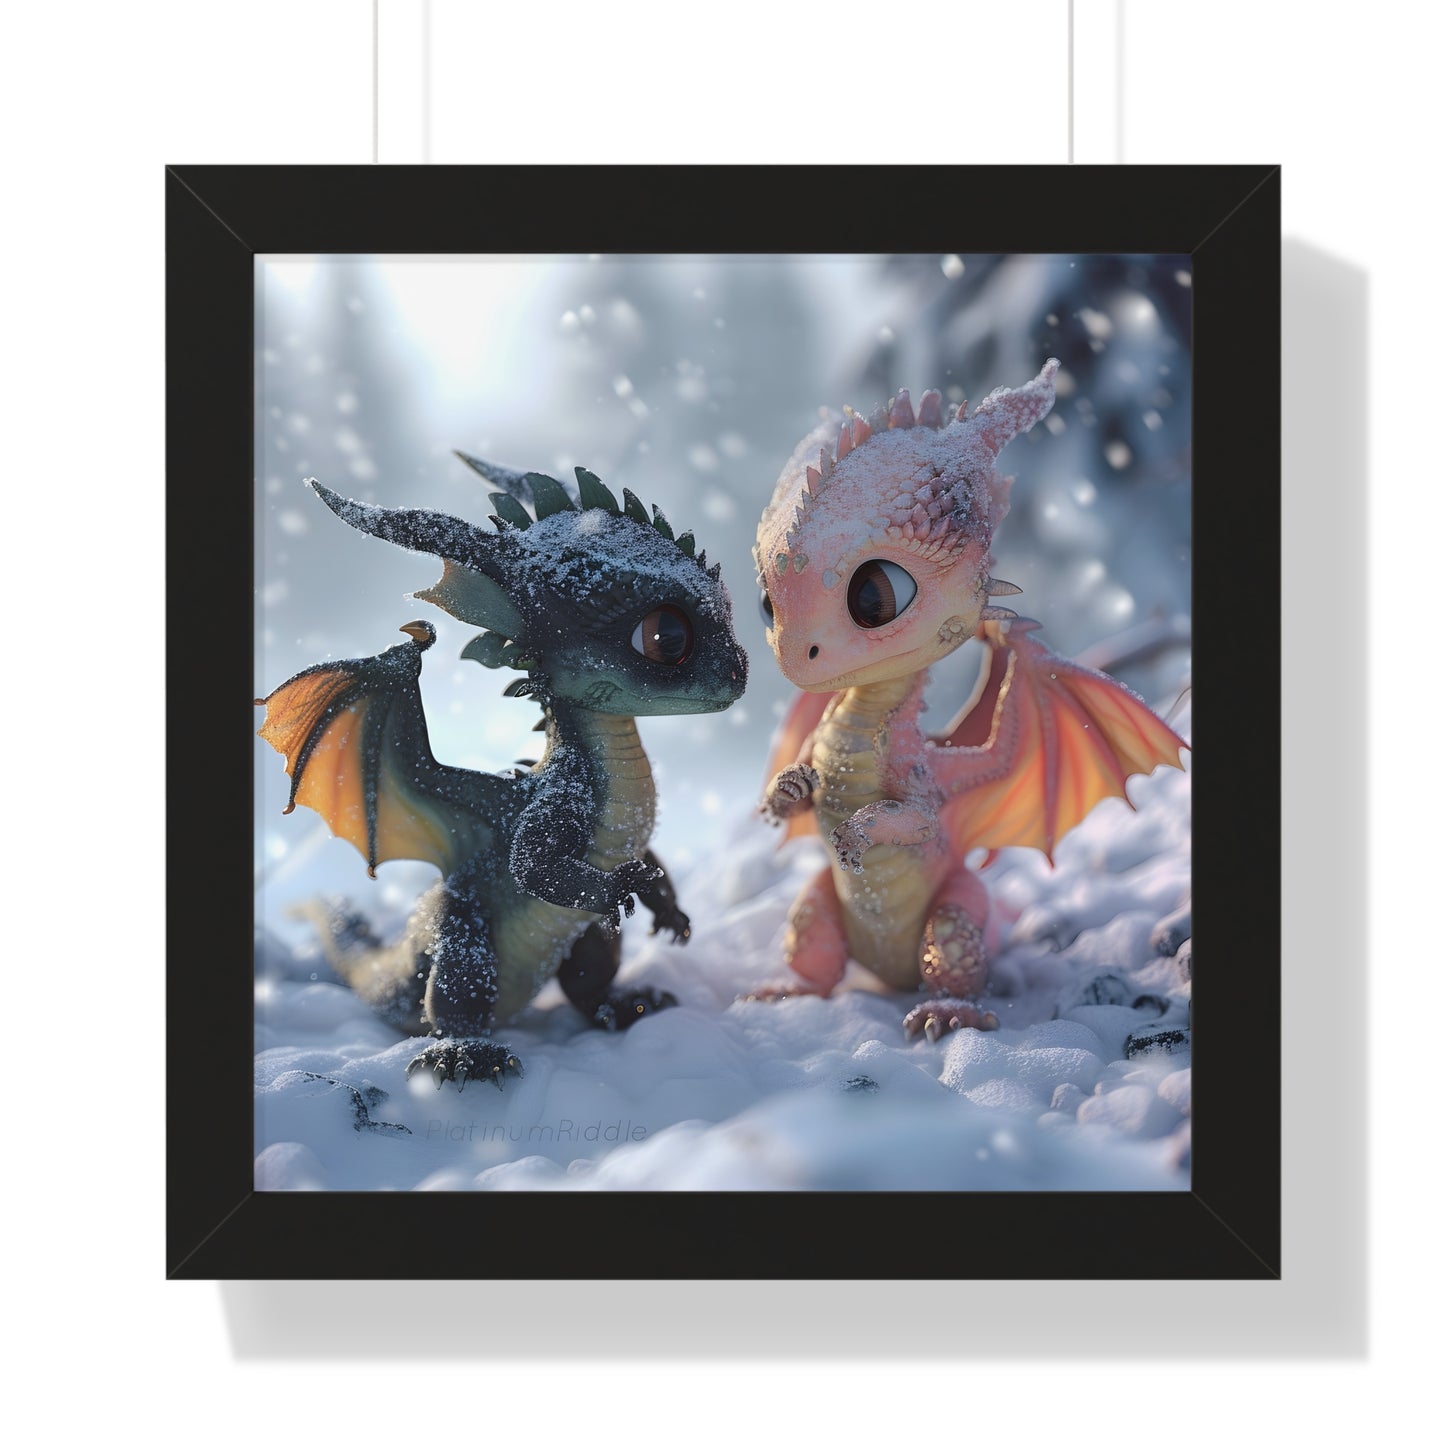 "Pinky' & Blue" Baby Dragons - 1st Edition - FRAMED POSTER